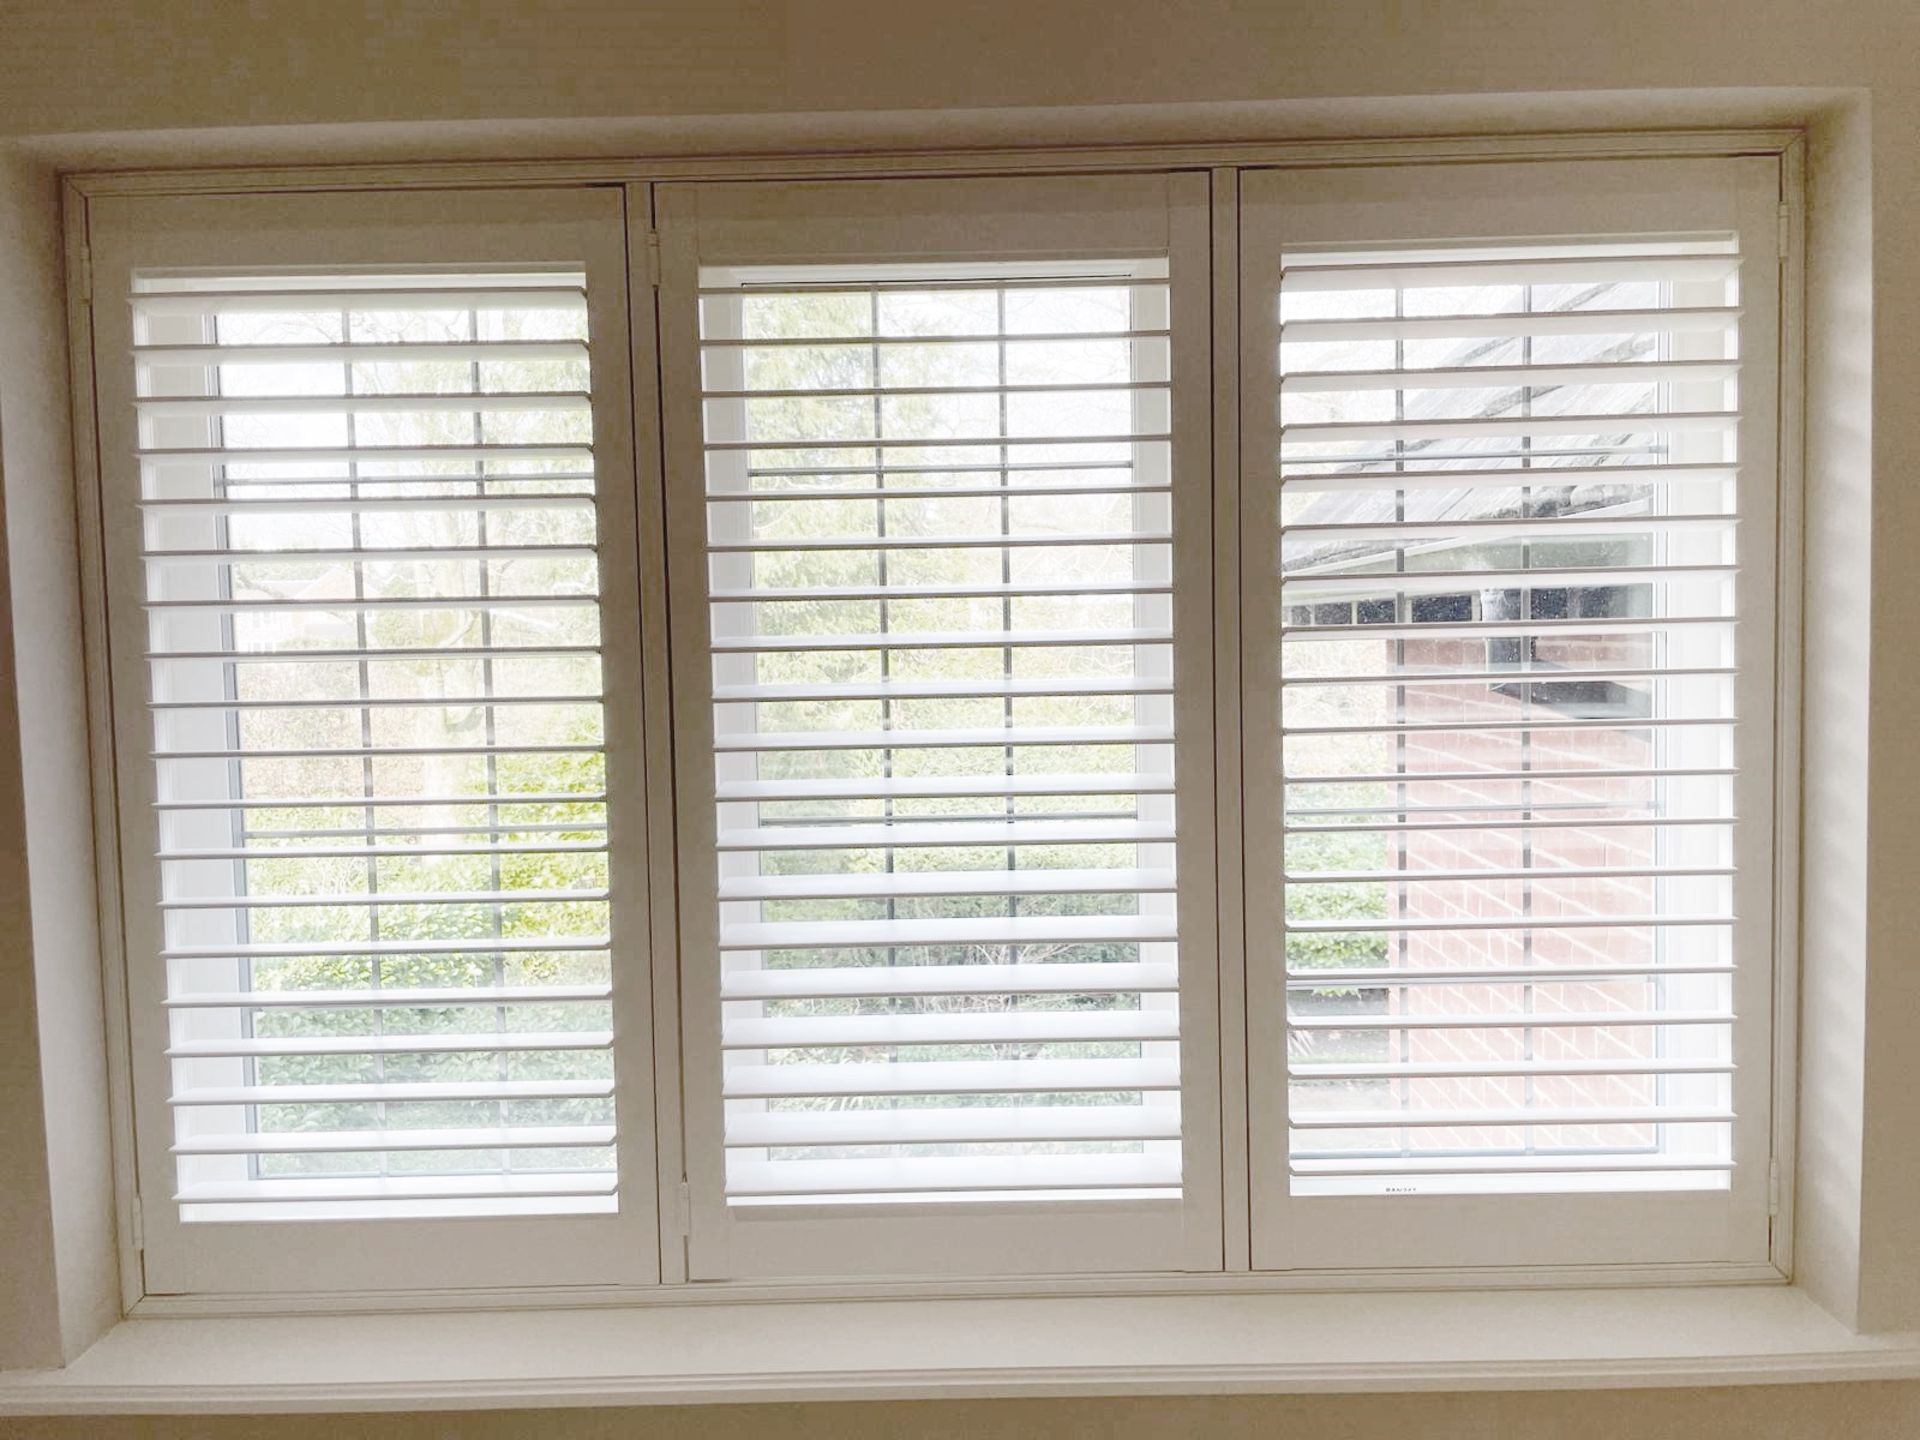 1 x Hardwood Timber Double Glazed Leaded 3-Pane Window Frame fitted with Shutter Blinds